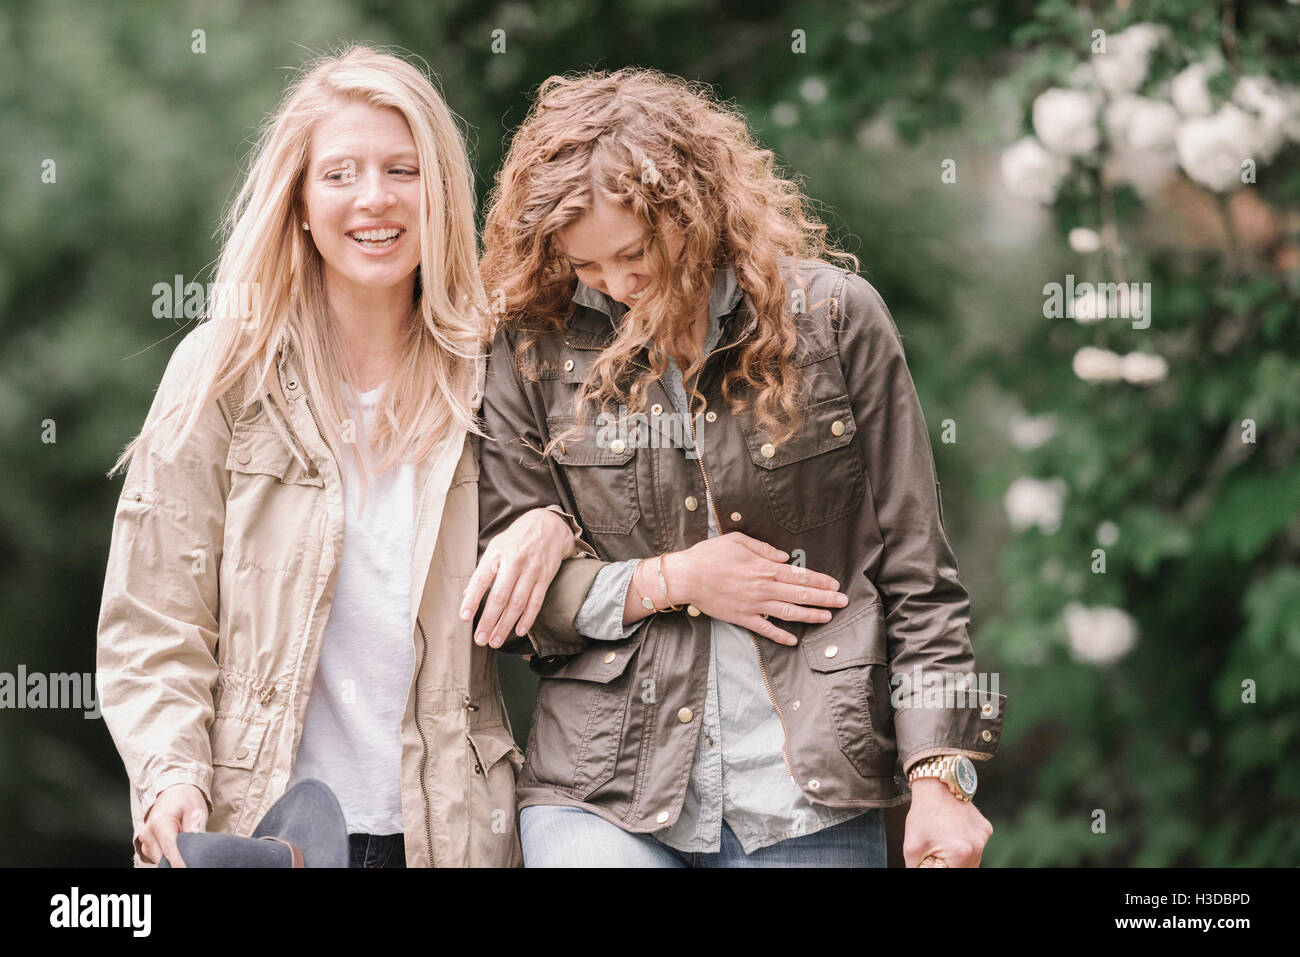 Two women walking arm in arm in the countryside. Stock Photo